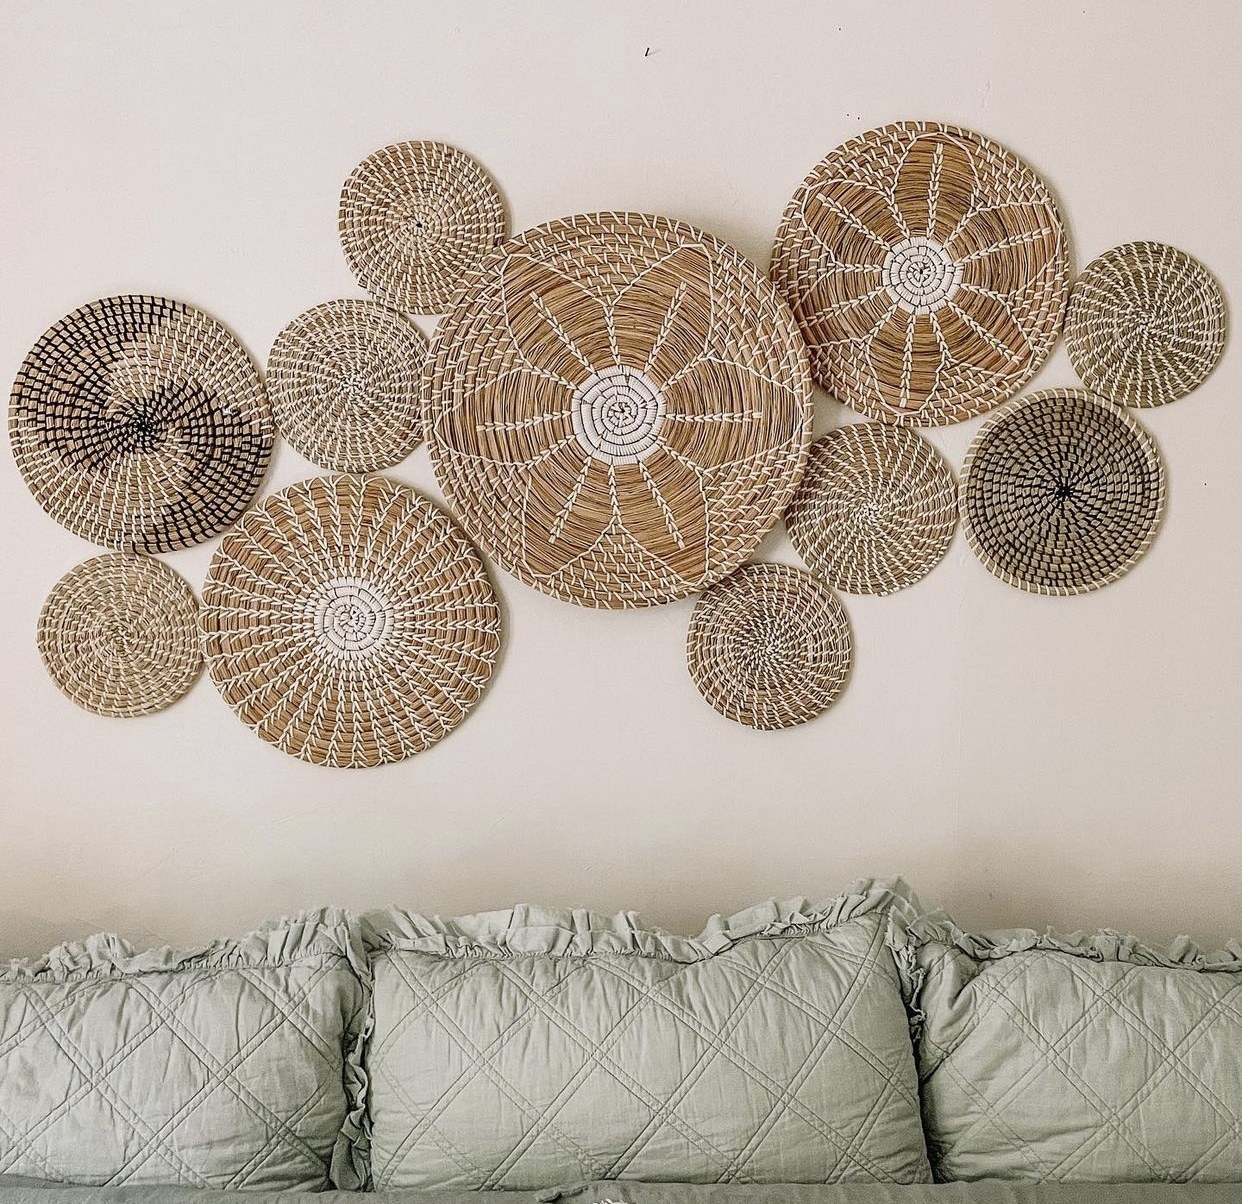 the set of handcrafted bowls, each of different sizes making a gallery wall above a bed